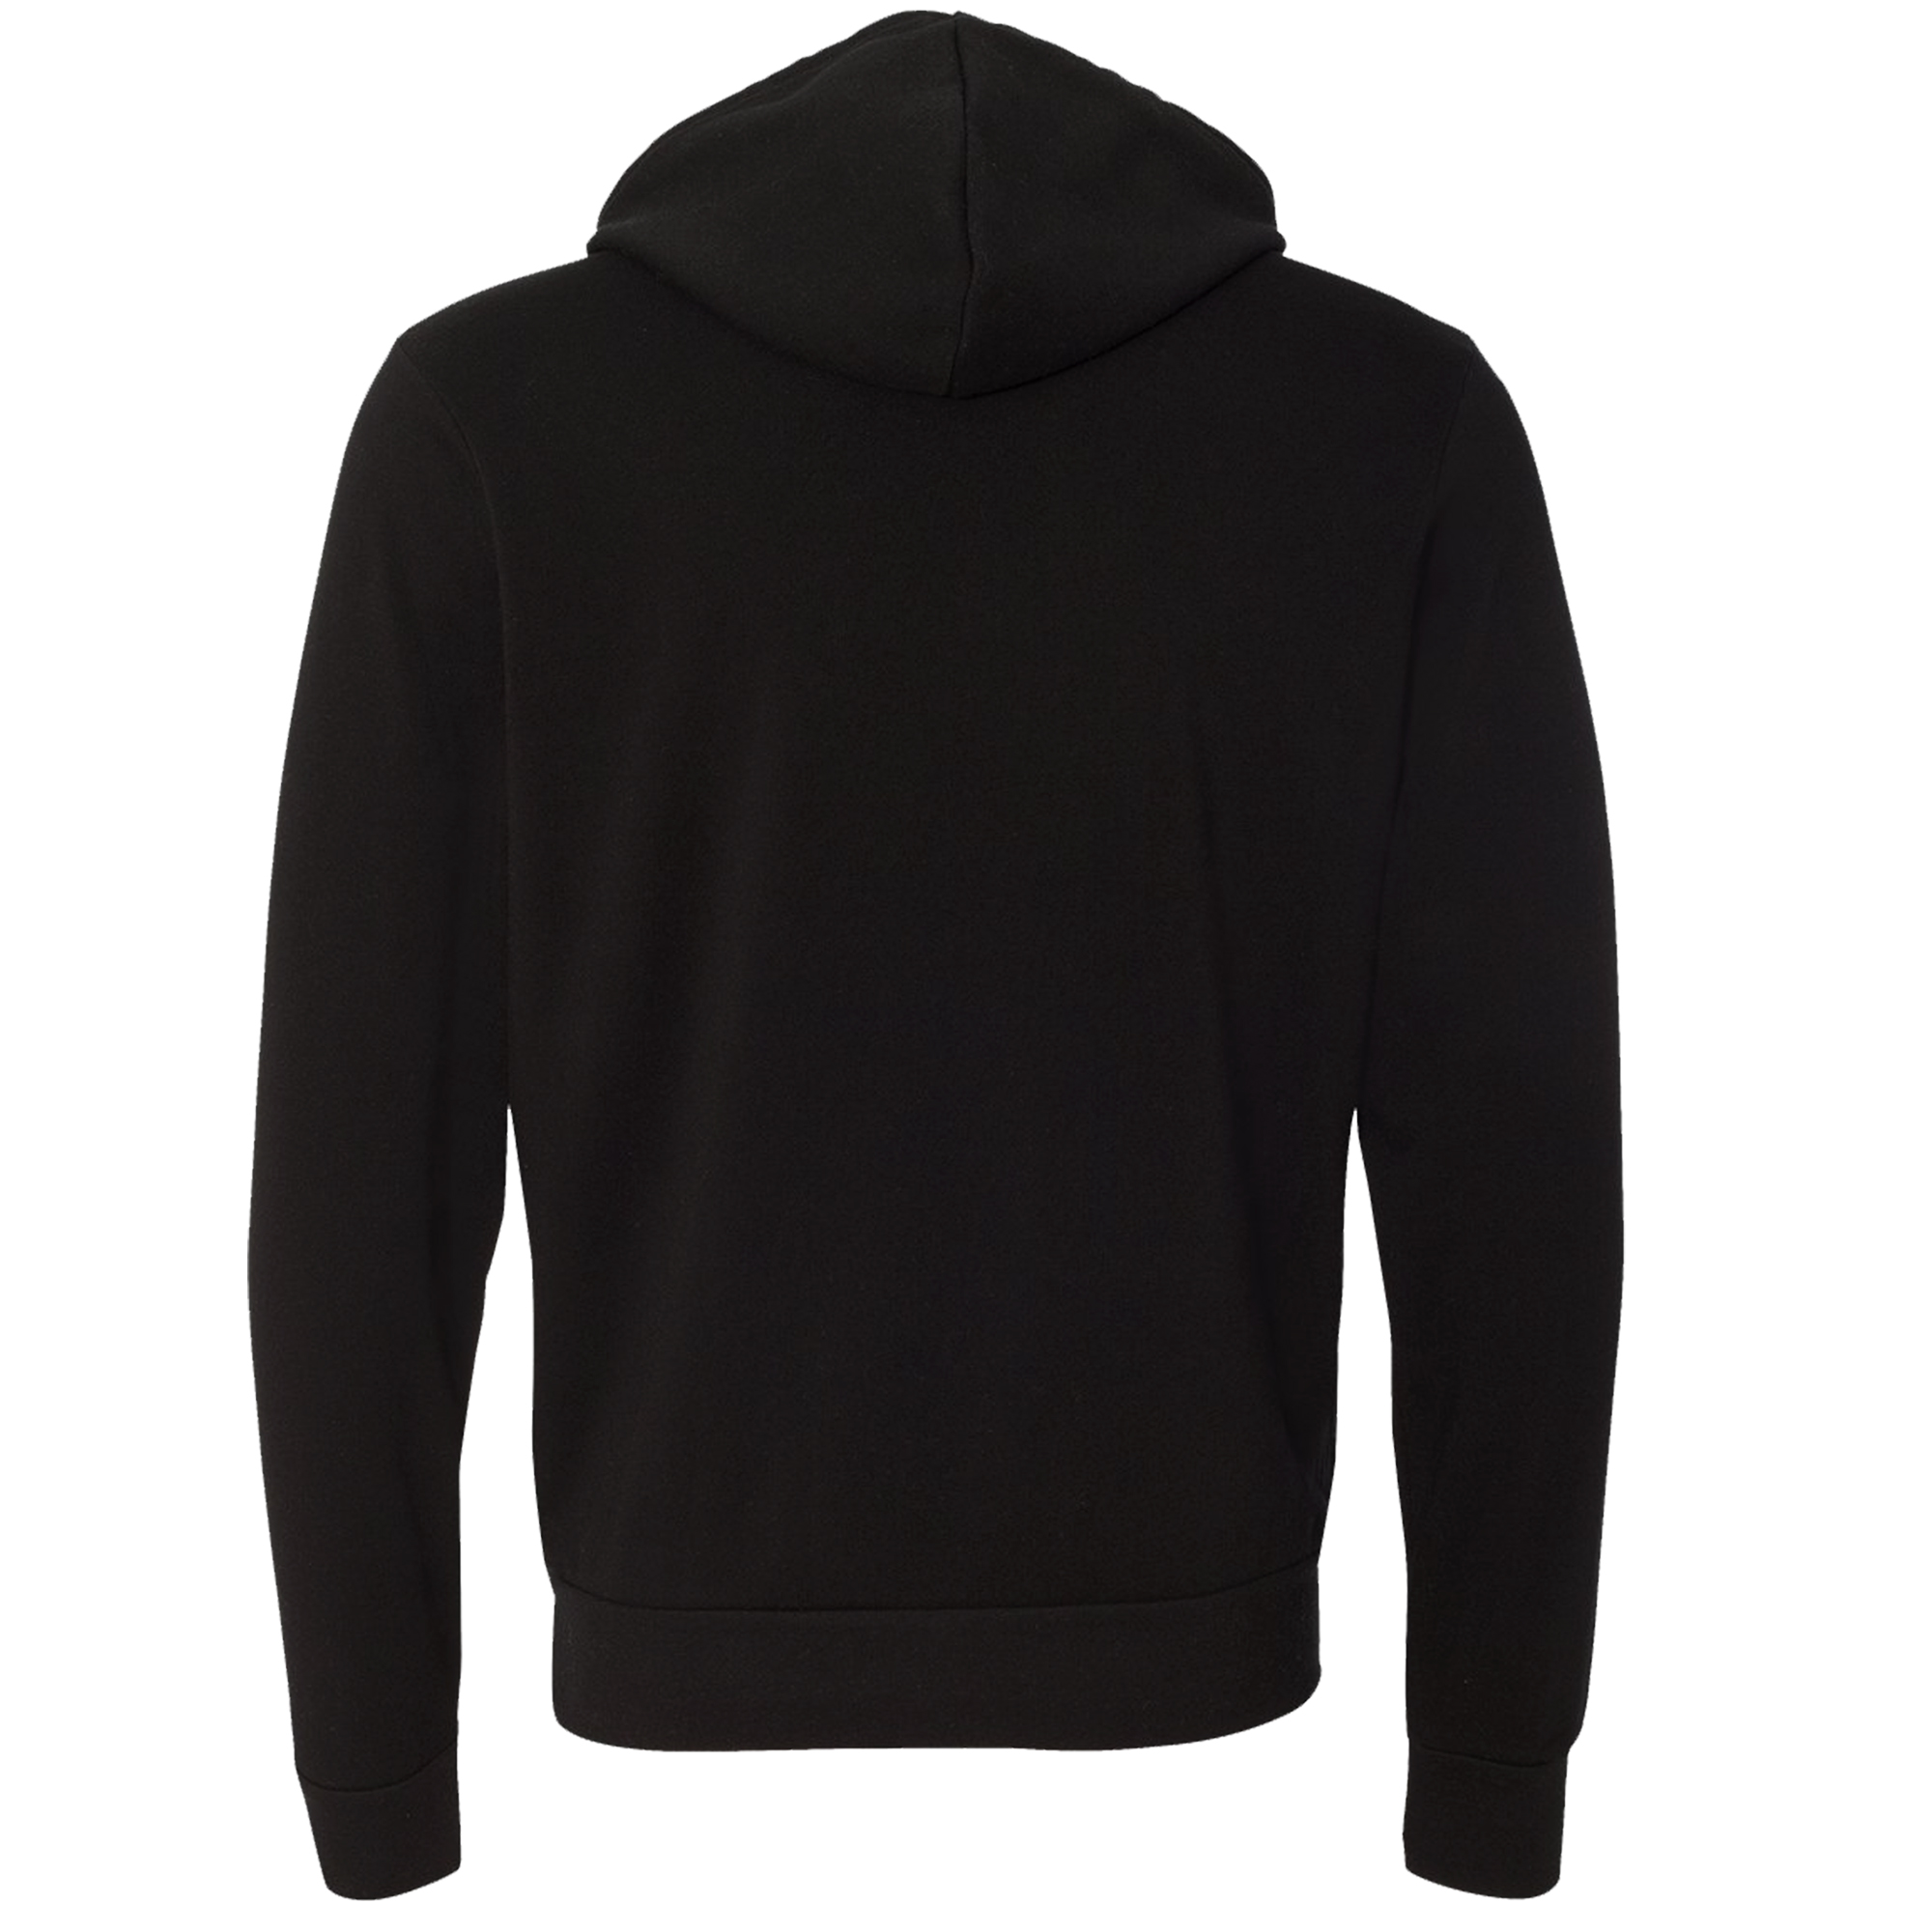 Rocksteady Running - Collective Hoodie - Black